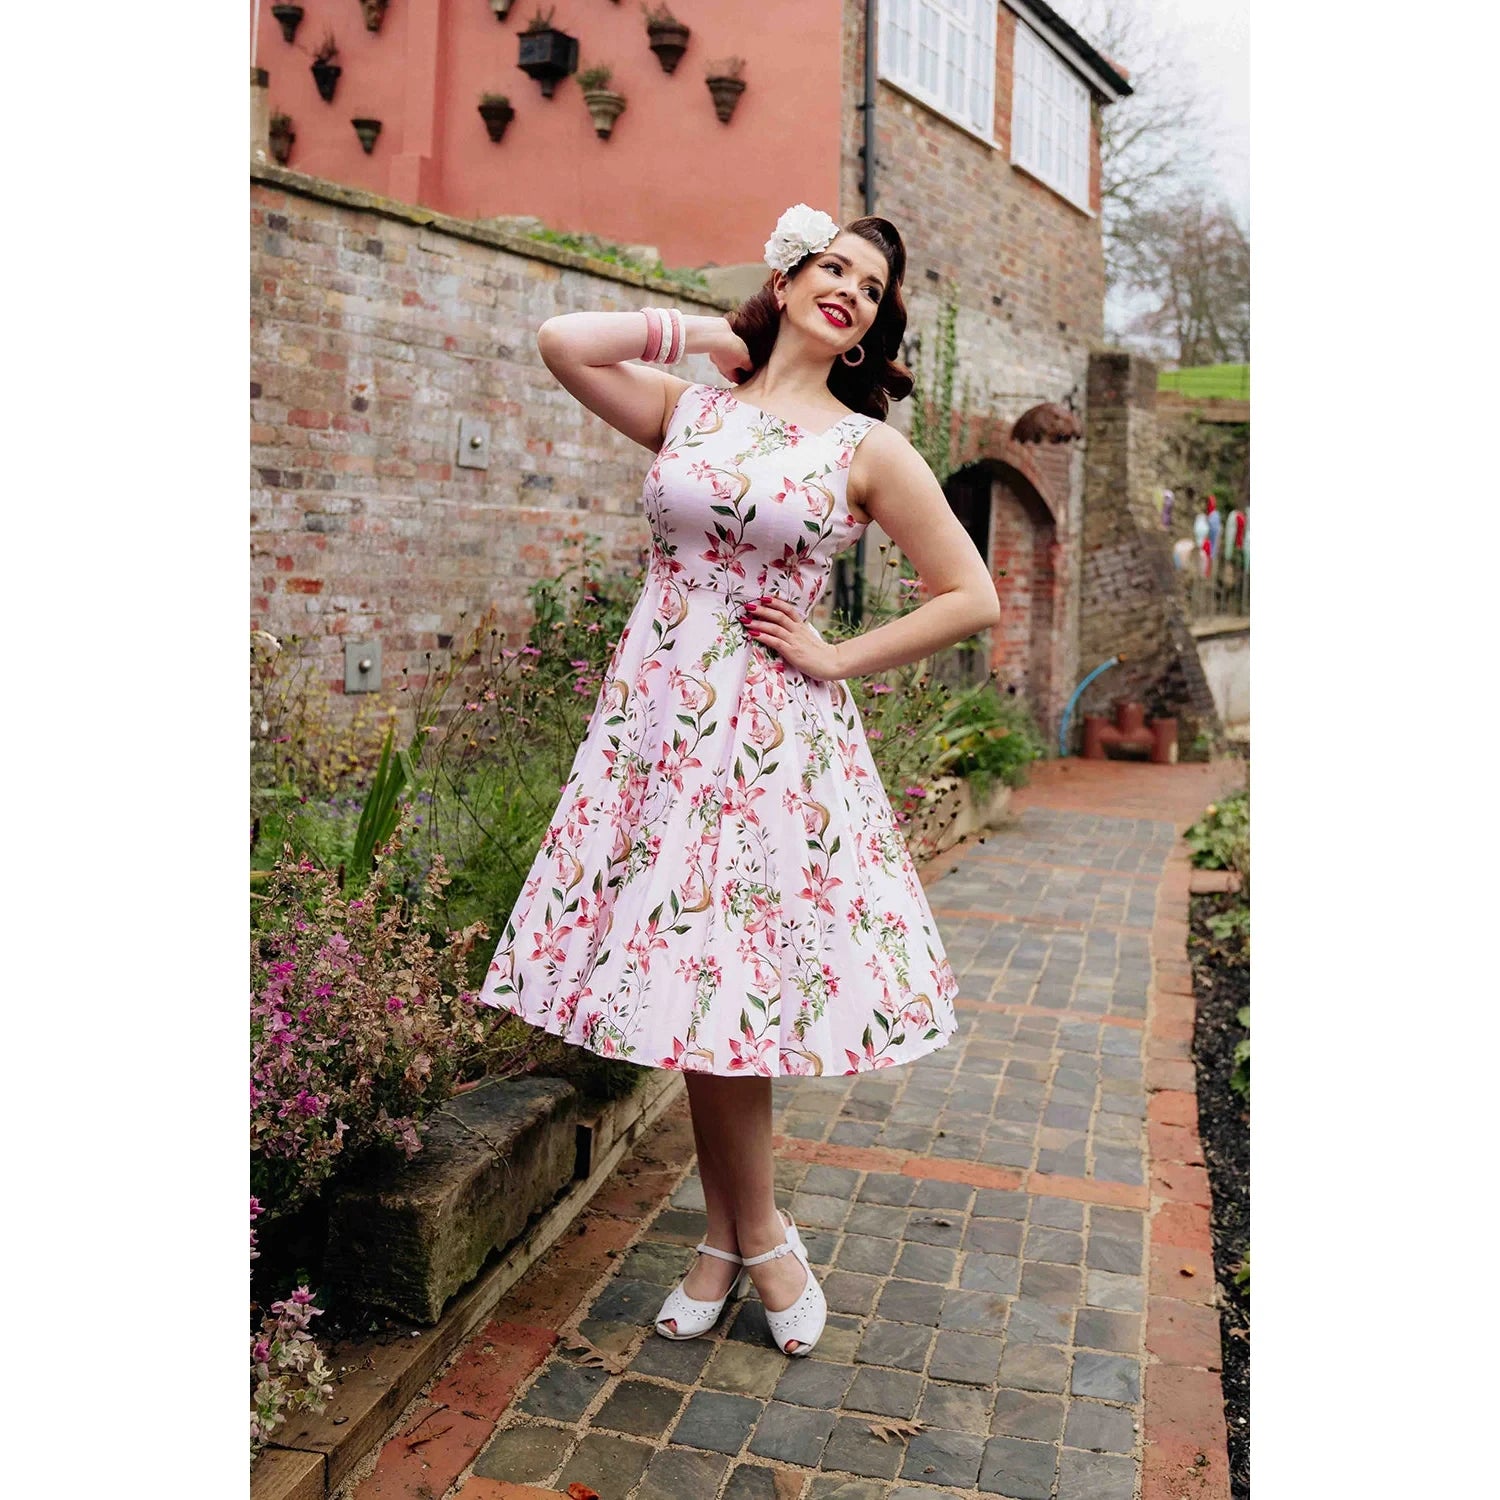 Soft Pink Floral Summer Party Swing Tea Dress